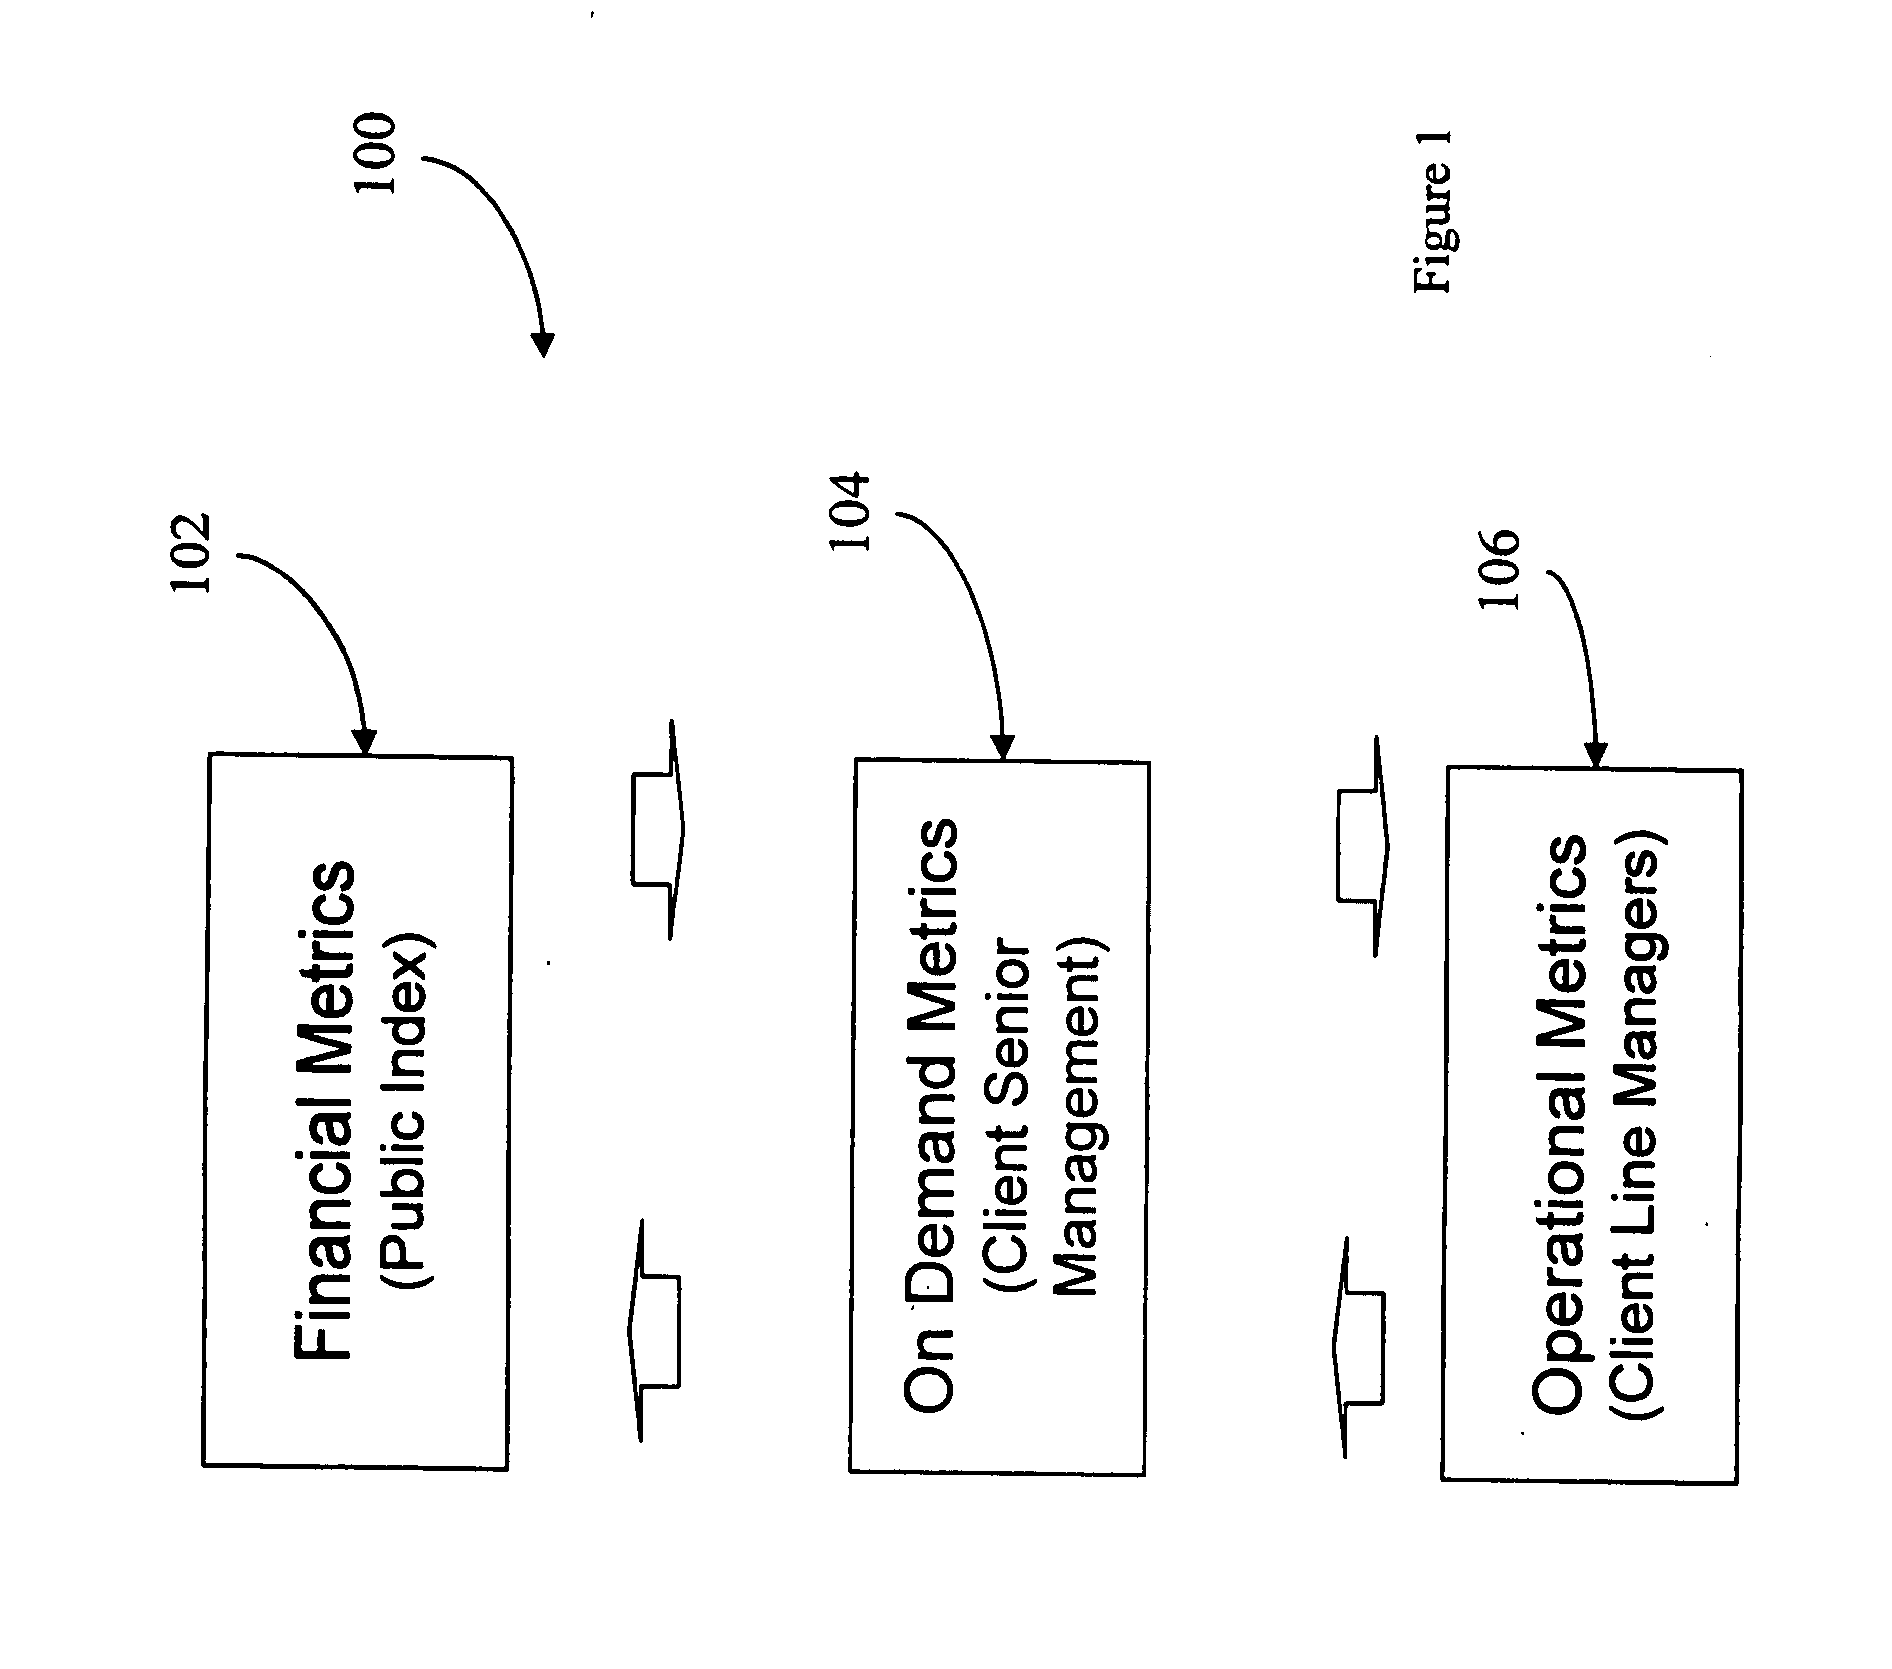 System and method for correlating business transformation metrics with sustained business performance